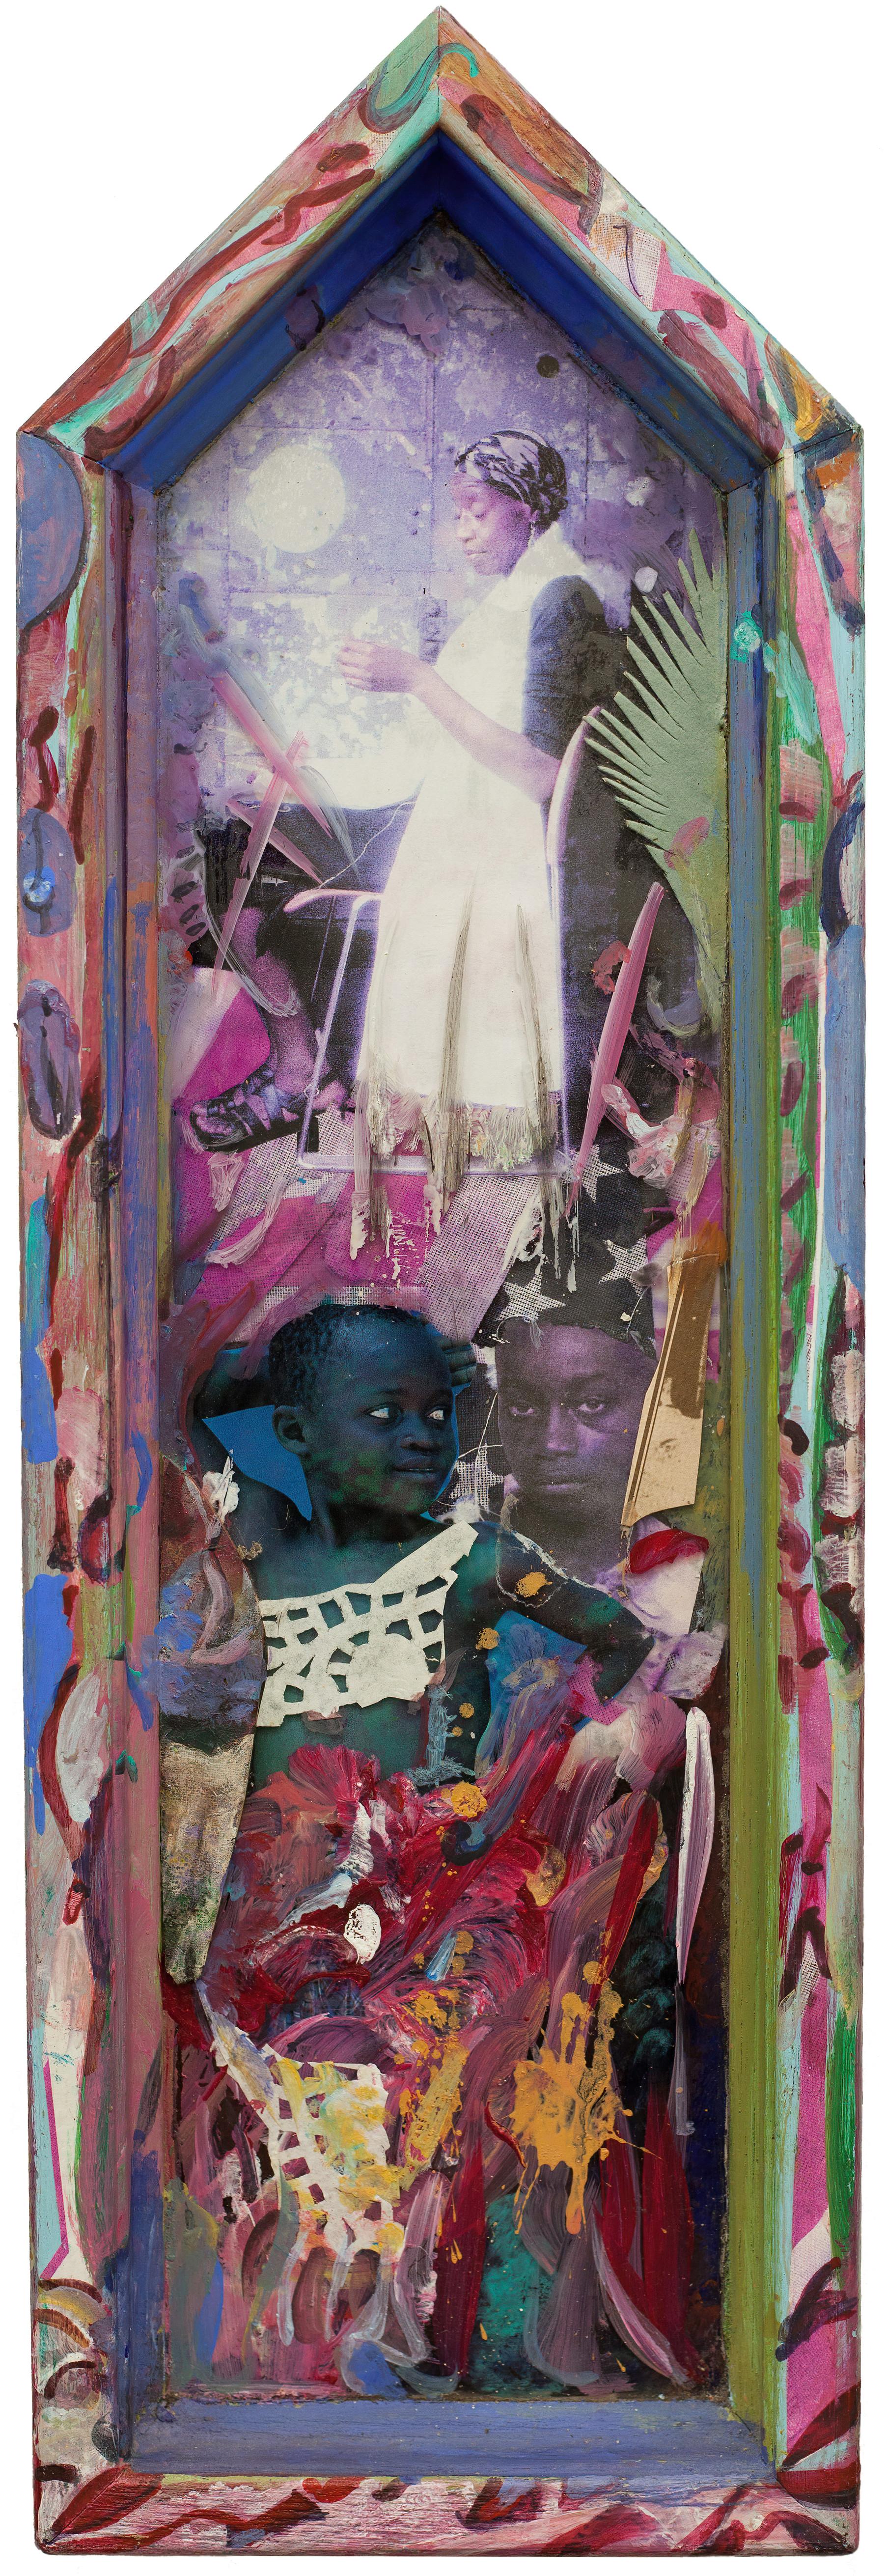 This is an 3-part painting / construction (assemblage) created from acrylic paint, wood, glass, and found objects. It includes several historic photograph of figures as well as many scenes from Black African American cultural history. Each piece